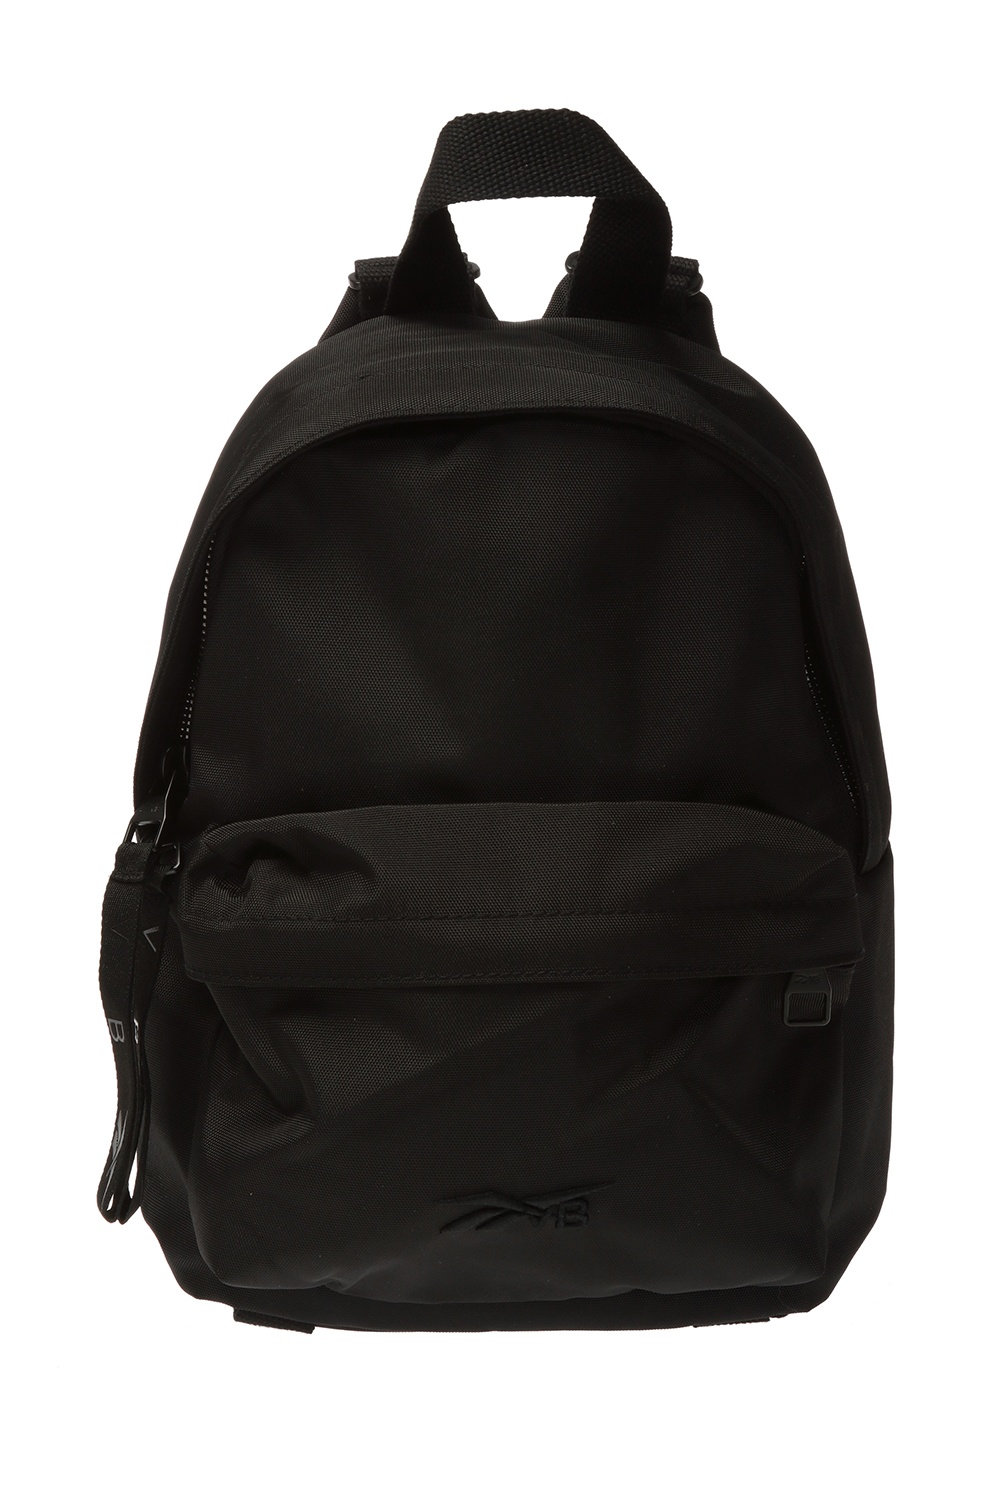 backpack singapore online